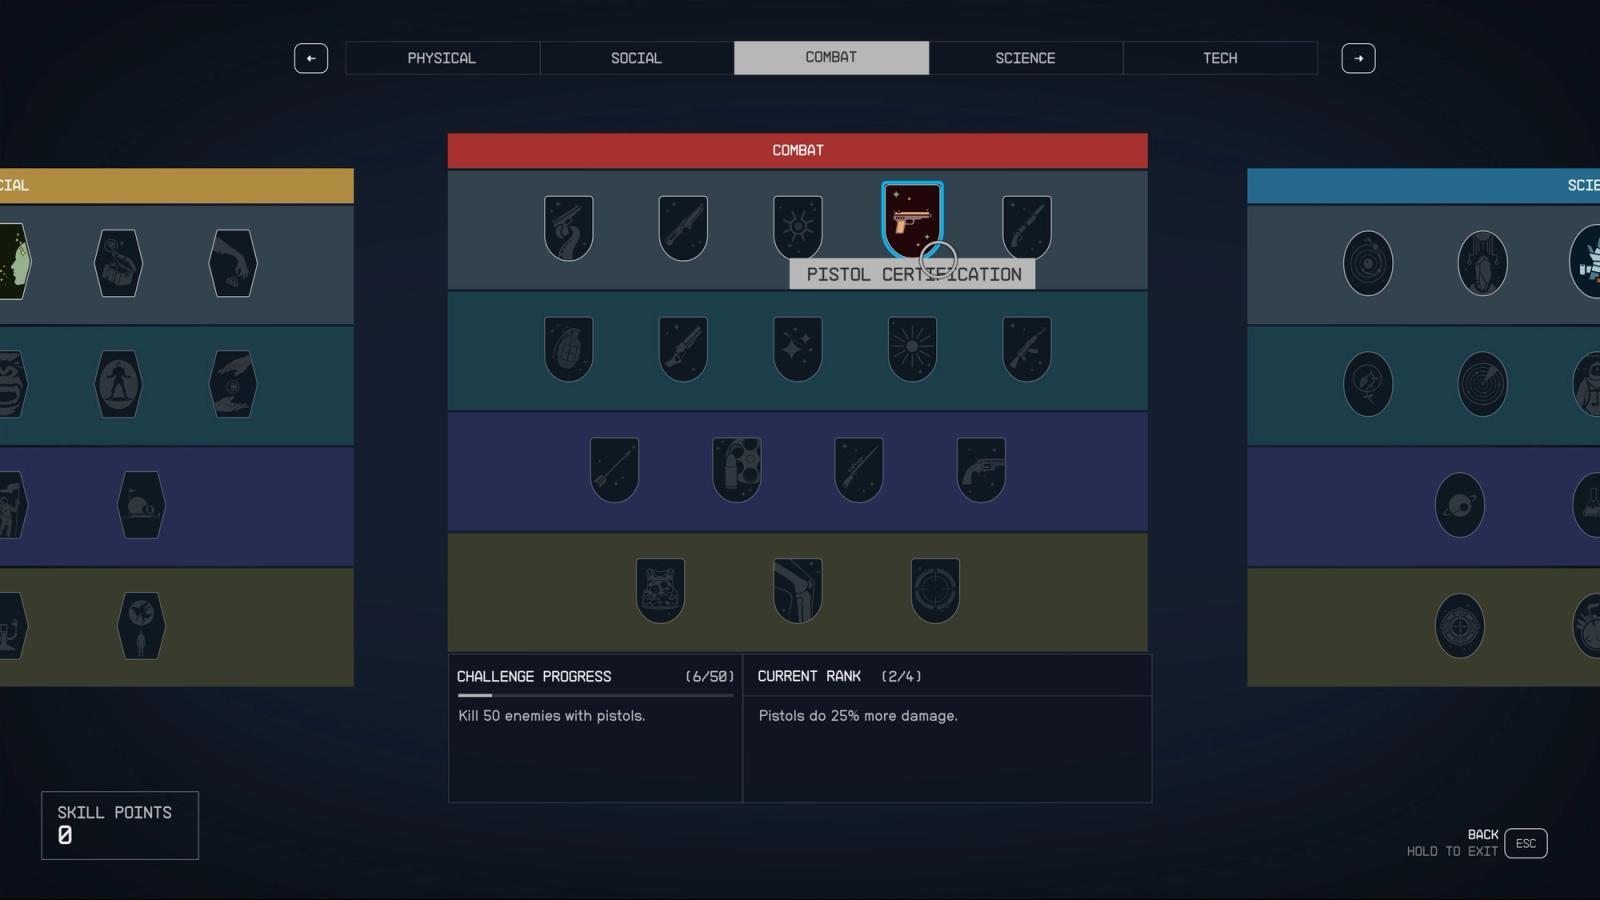 starfield skill tree for combat with pistol certification